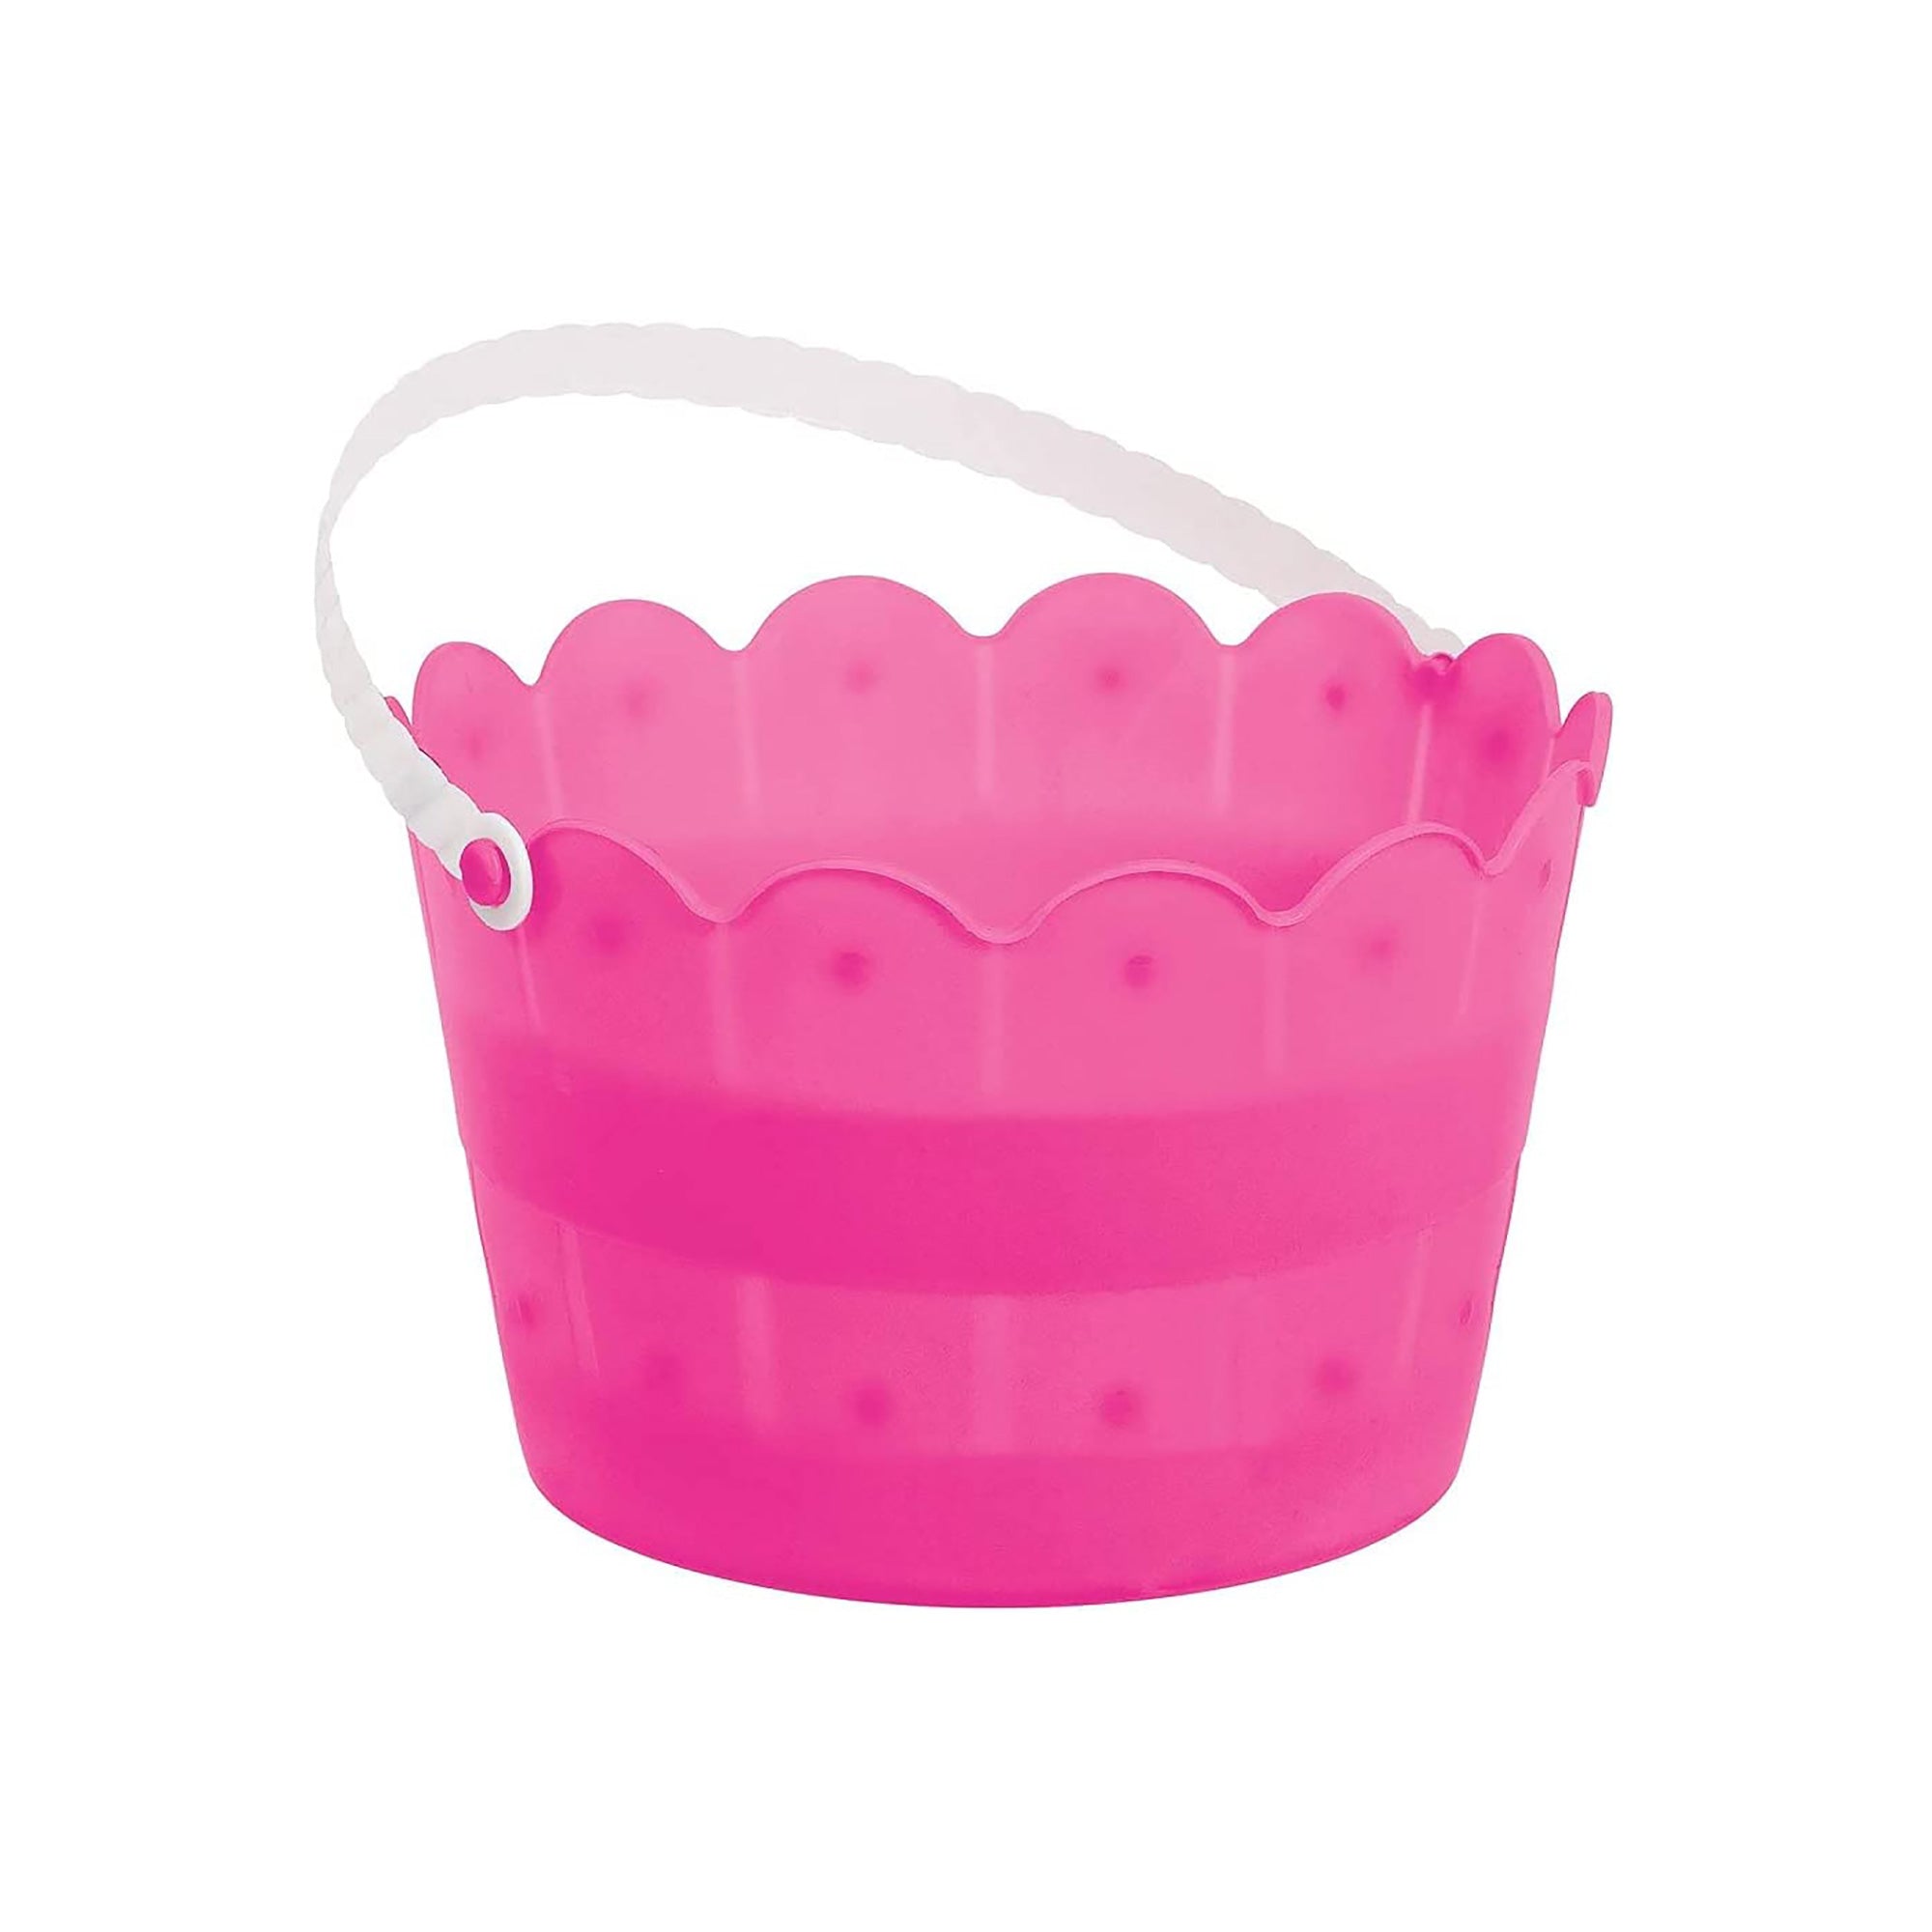 Pink Easter Plastic Scalloped Bucket, 6 x 8 Inches, 1 Count